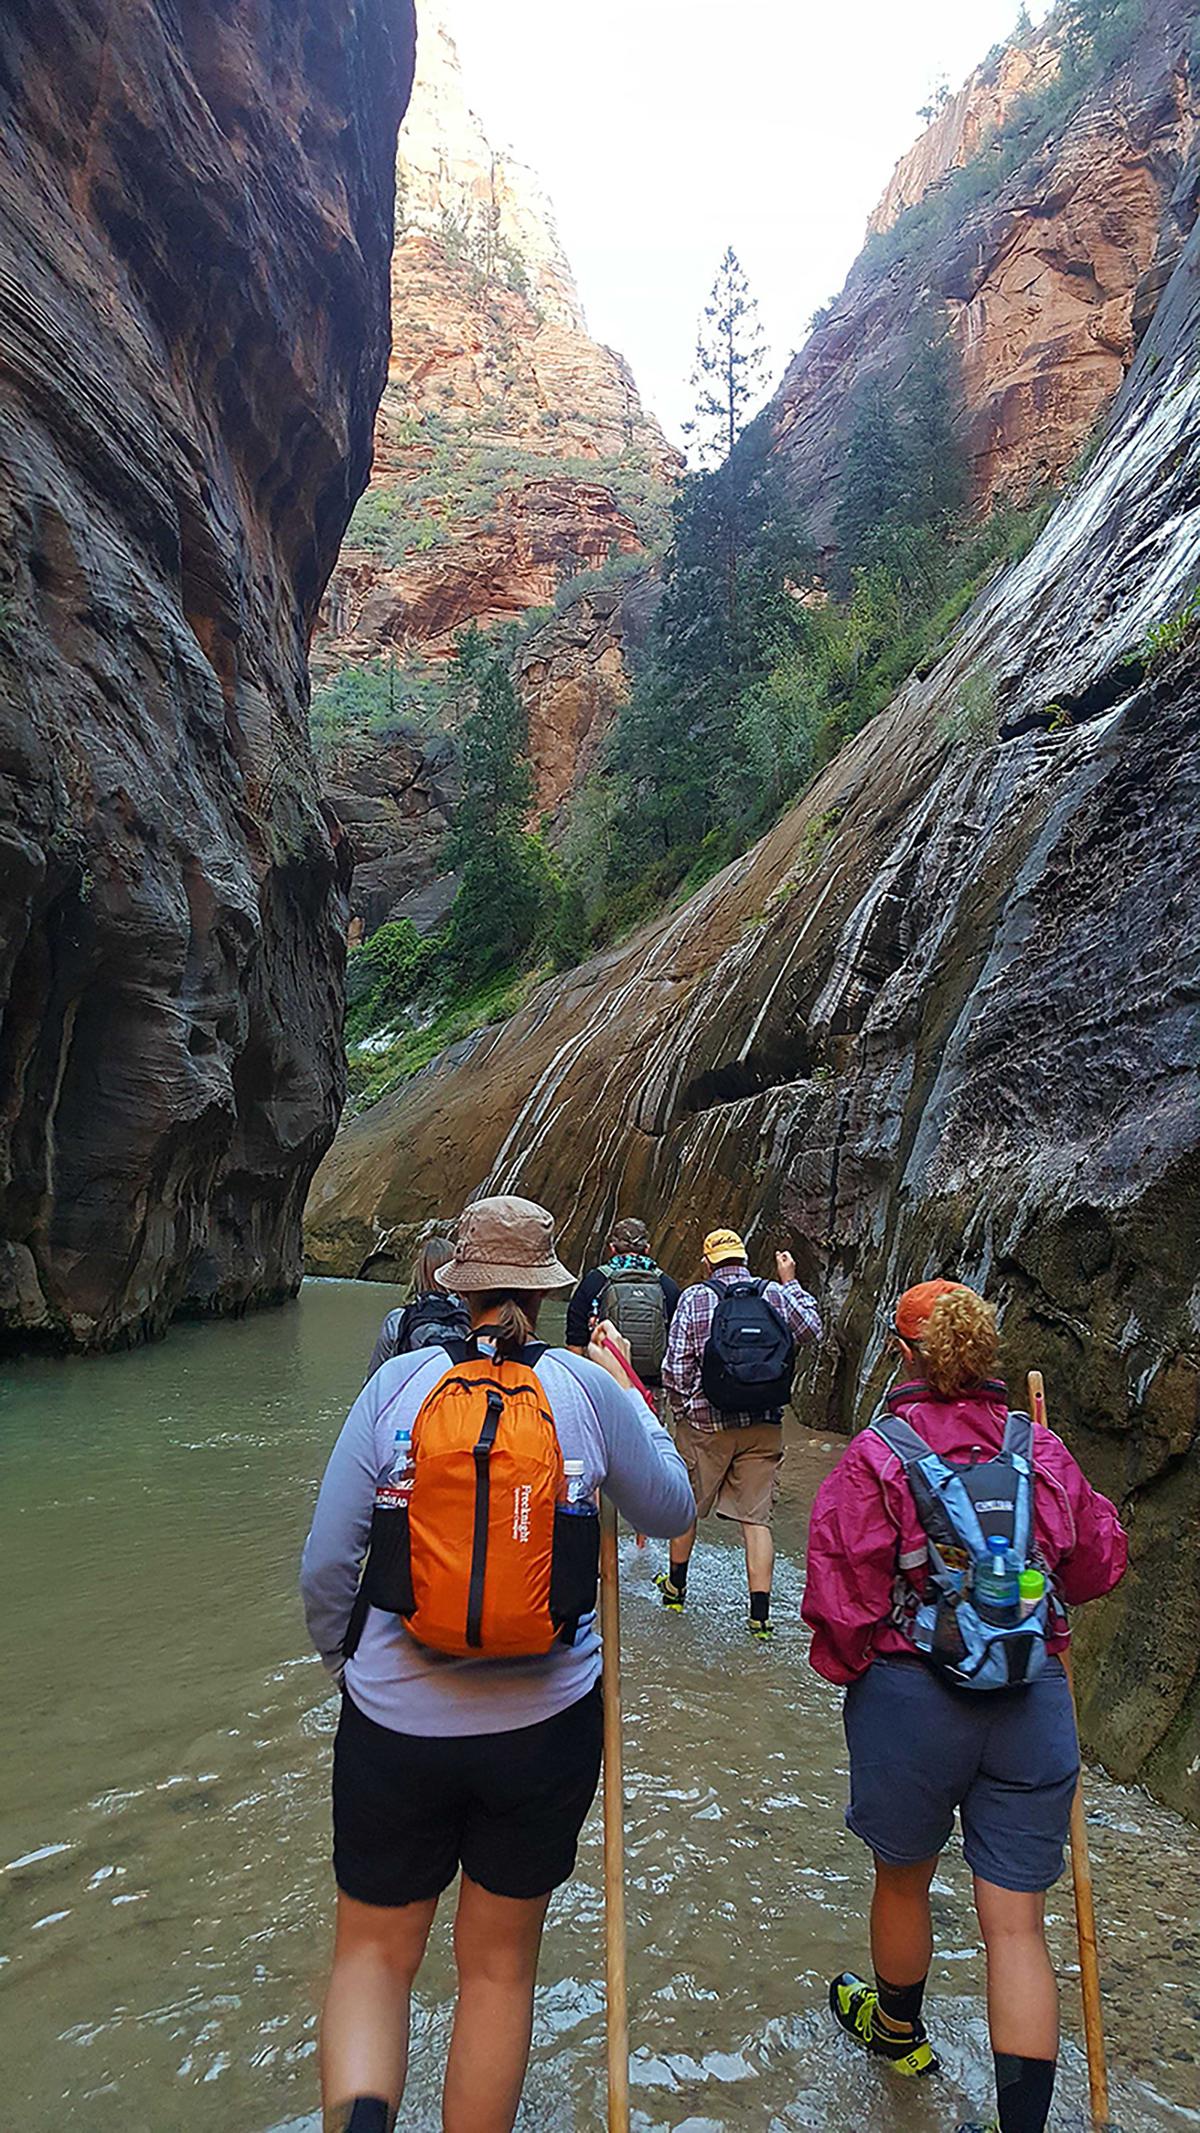 Singles Travel International offers trips within the States as well as overseas. This trip included the Grand Canyon, Bryce Canyon, Antelope Canyon, and several other stops, including walking the Virgin River at the Narrows in Zion National Park (seen here). (Nancy Clanton/The Atlanta Journal-Constitution/TNS)